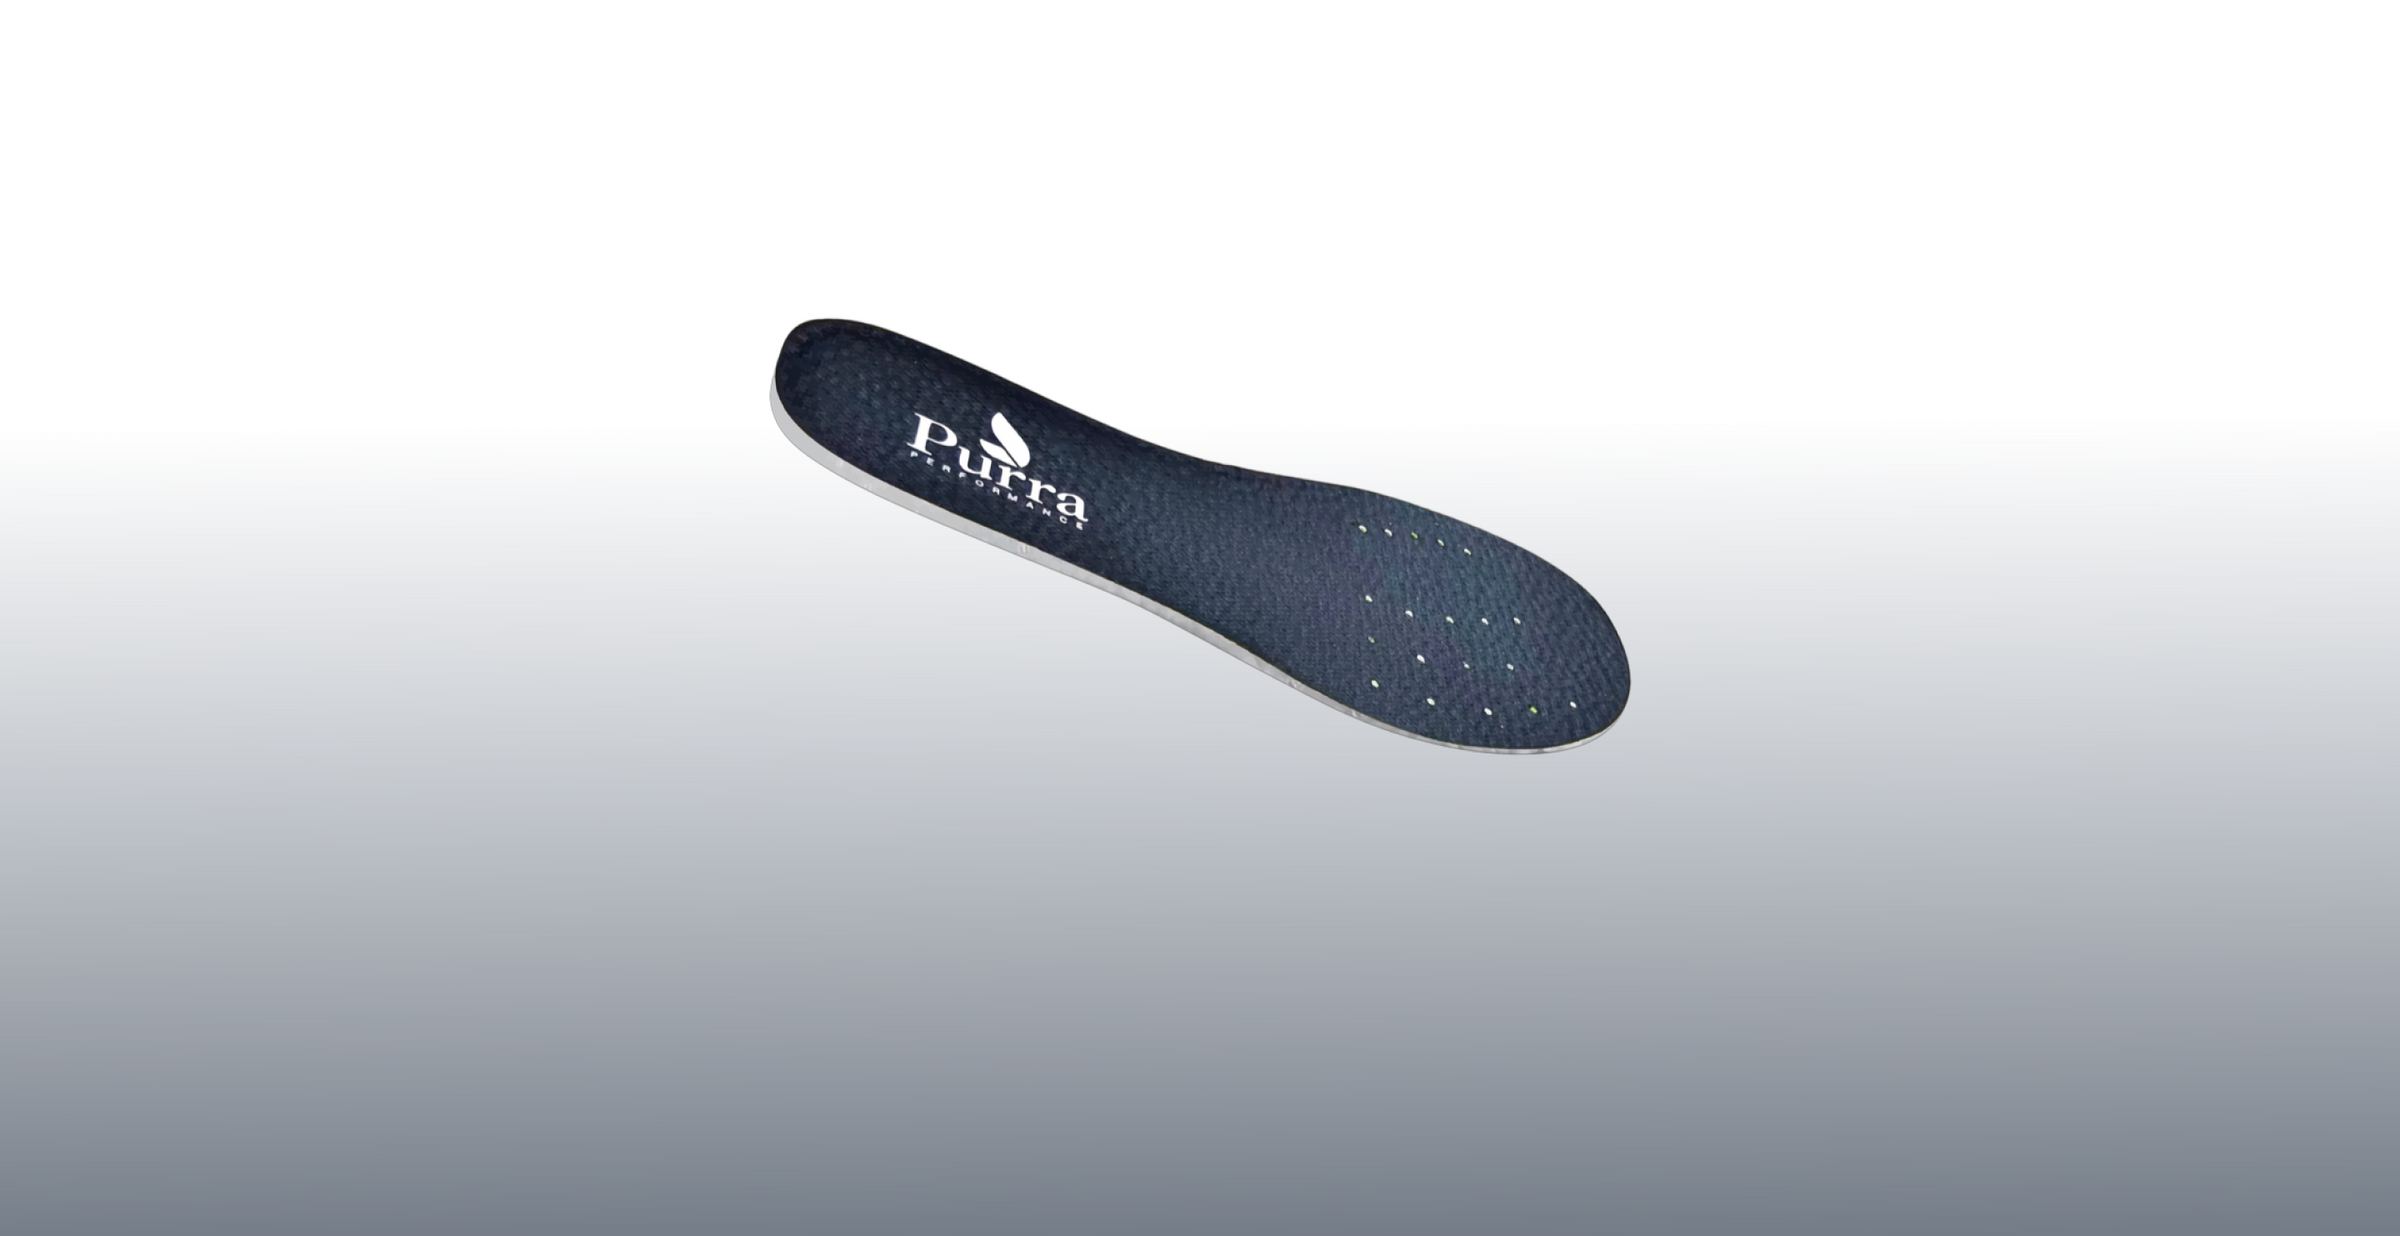 The super lightweight eTPE insole with a black upper and white lower is shown on a gradiated white to pale grey background.  The Purra logo is shown on the heel area.